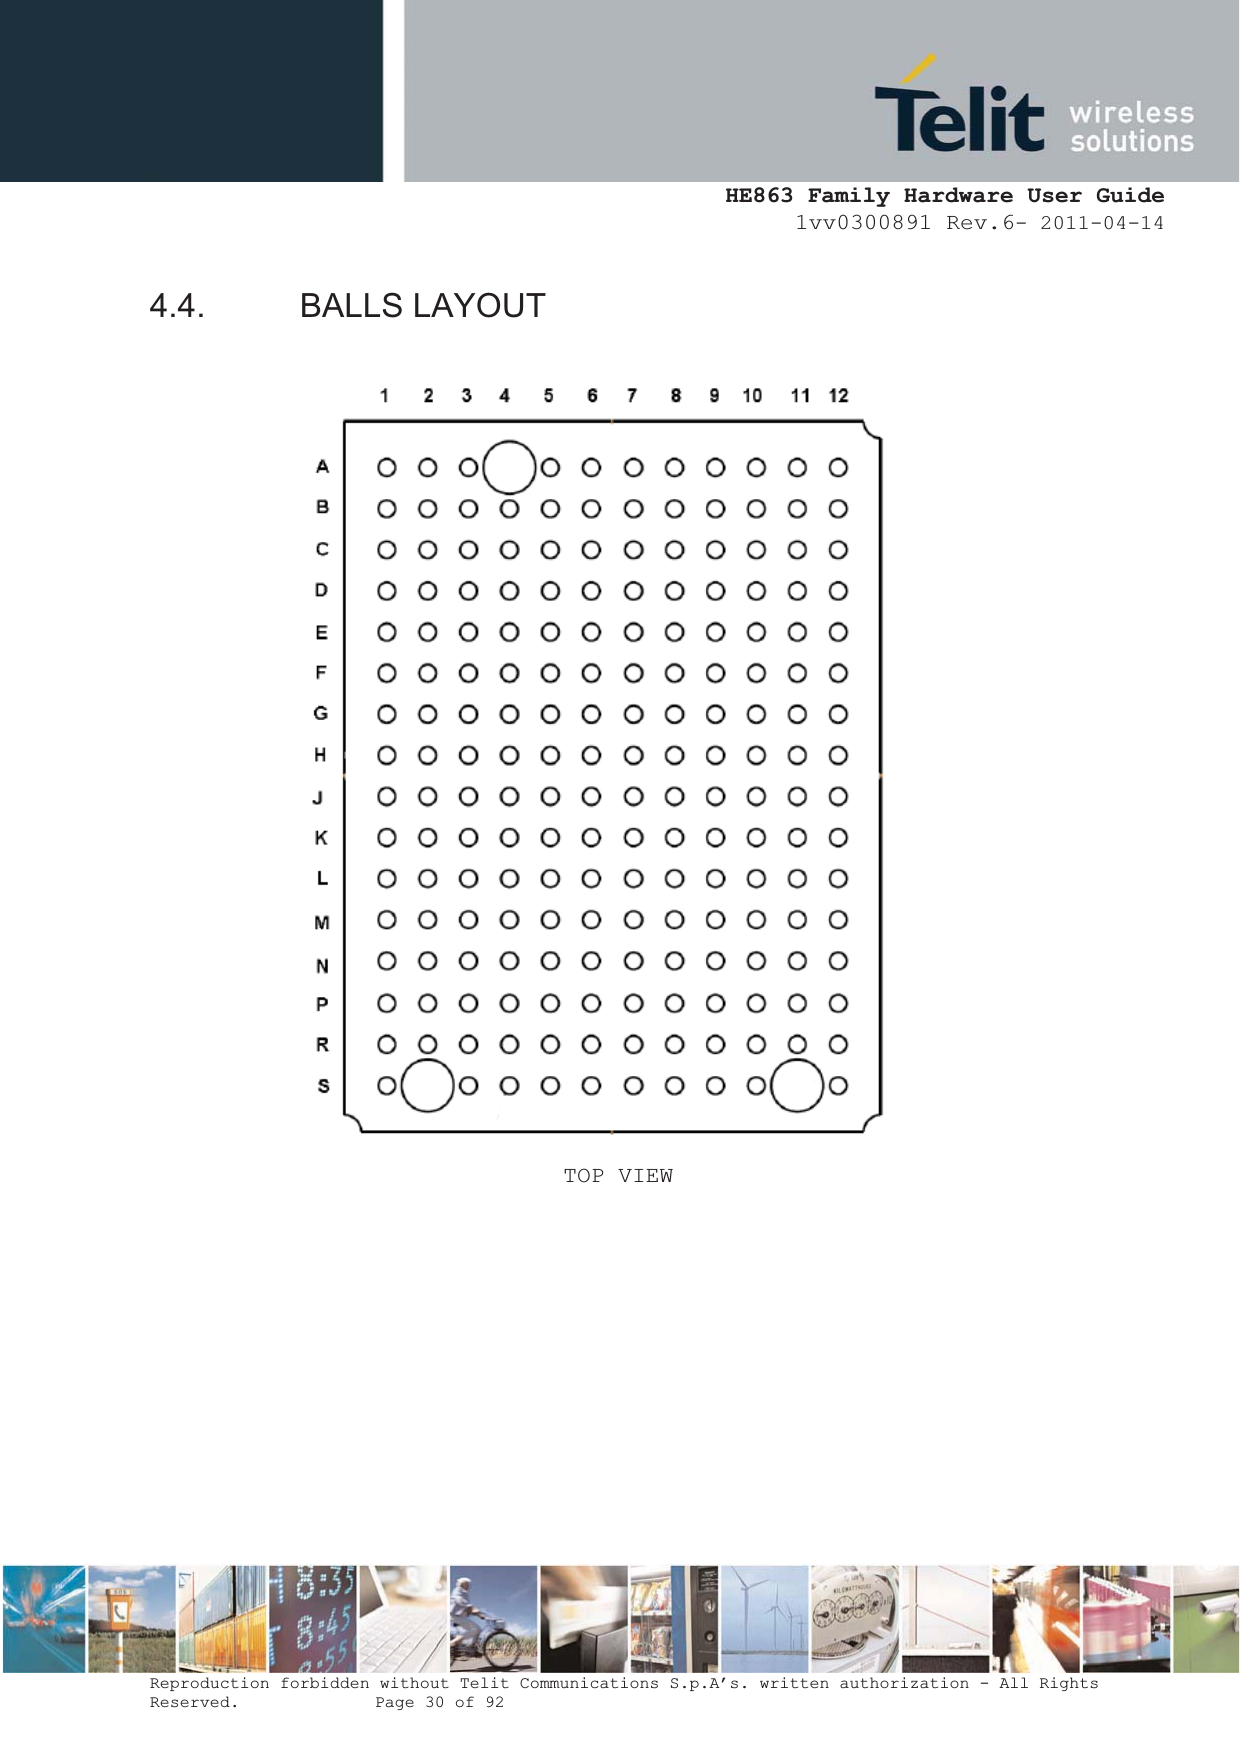  HE863 Family Hardware User Guide 1vv0300891 Rev.6- 2011-04-14    Reproduction forbidden without Telit Communications S.p.A’s. written authorization - All Rights Reserved.    Page 30 of 92  4.4. BALLS LAYOUT   TOP VIEW 